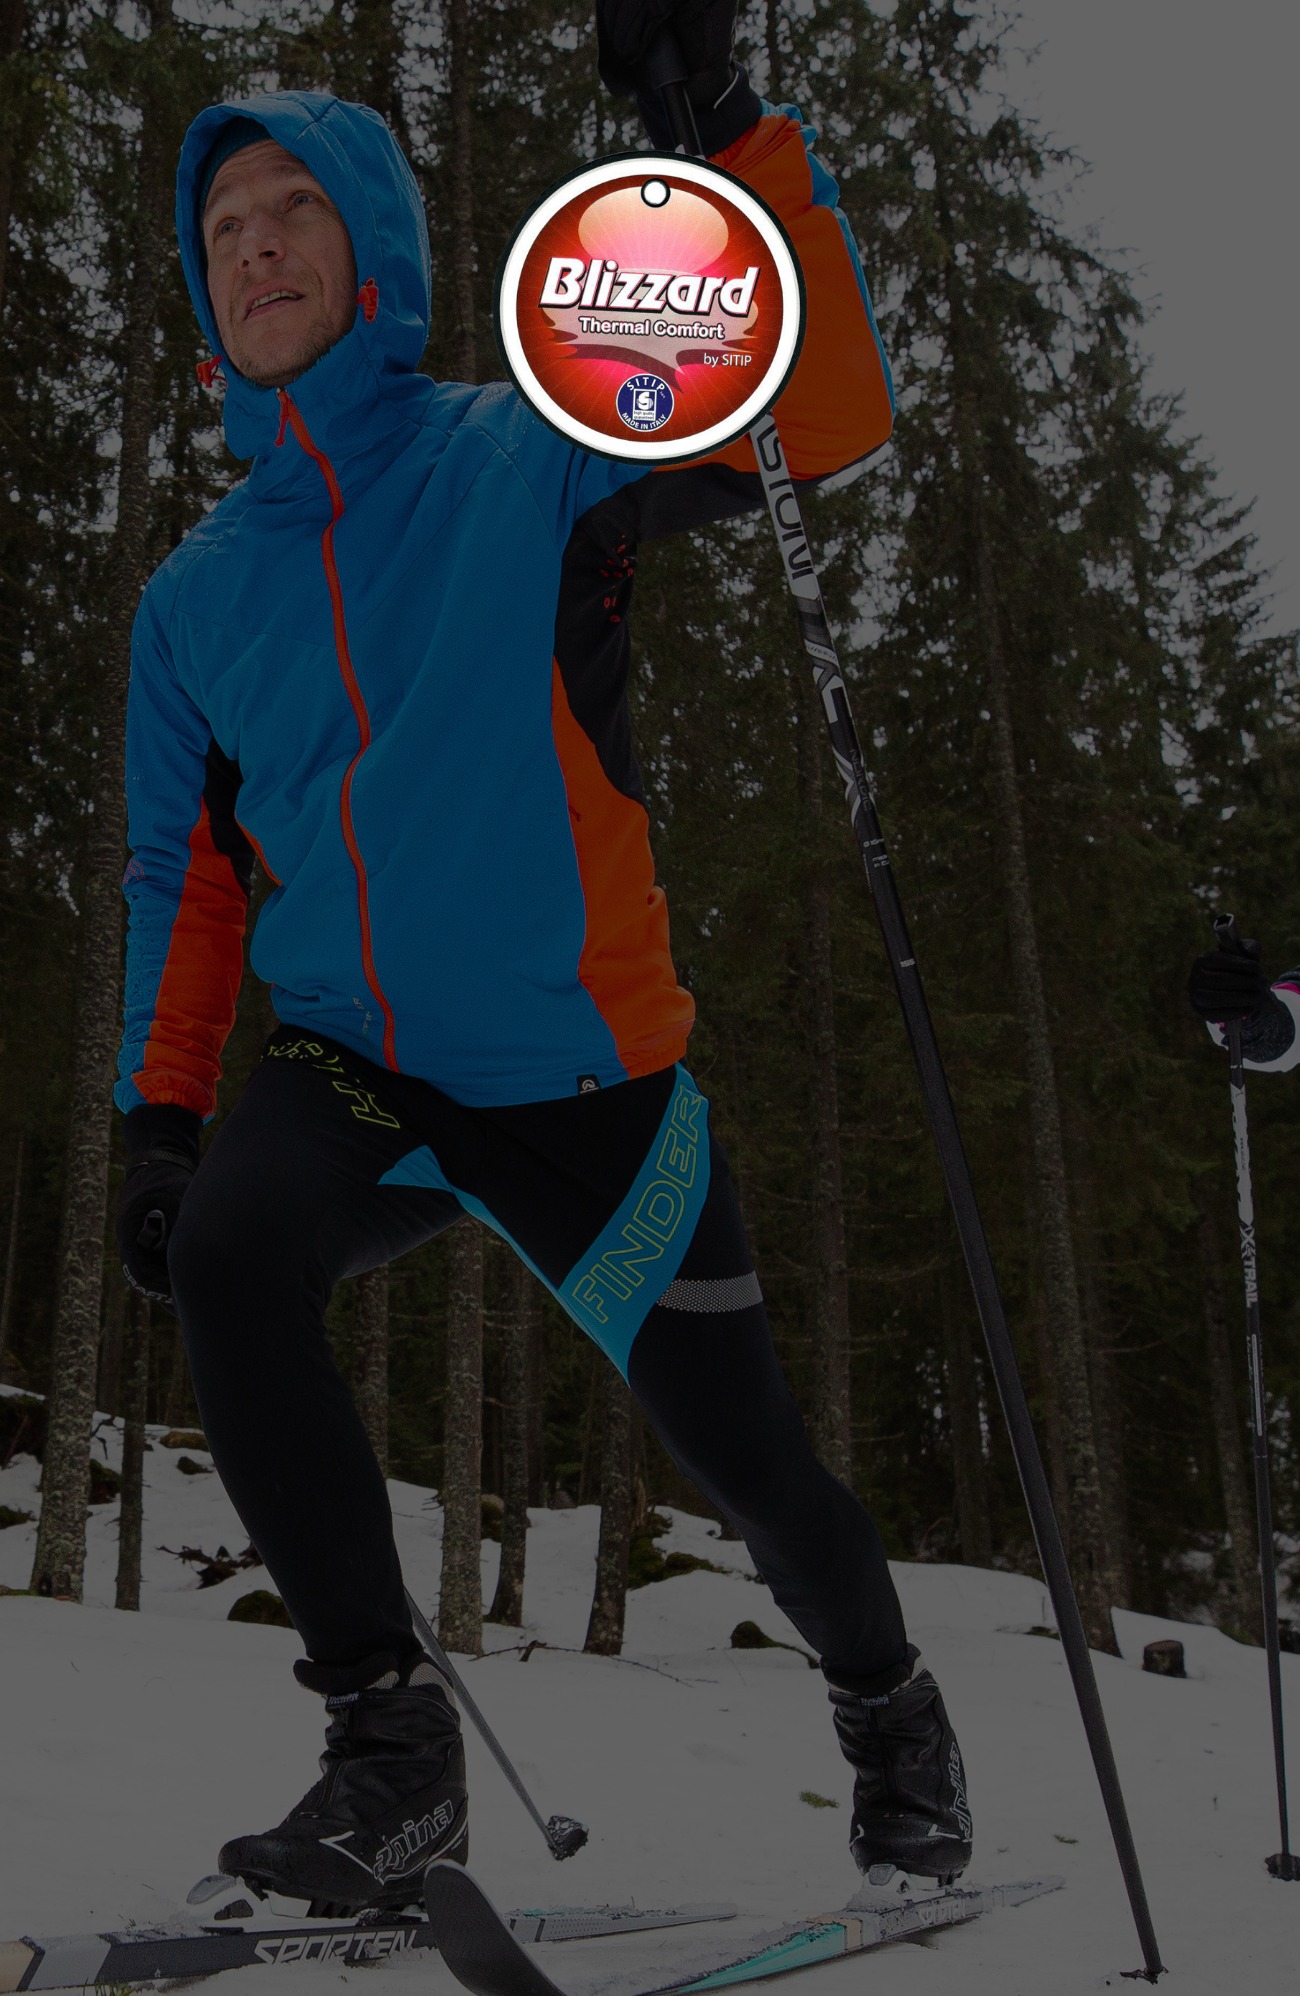 Blizzard® Thermal Comfort: How to stay comfortable in warm clothes during winter sports